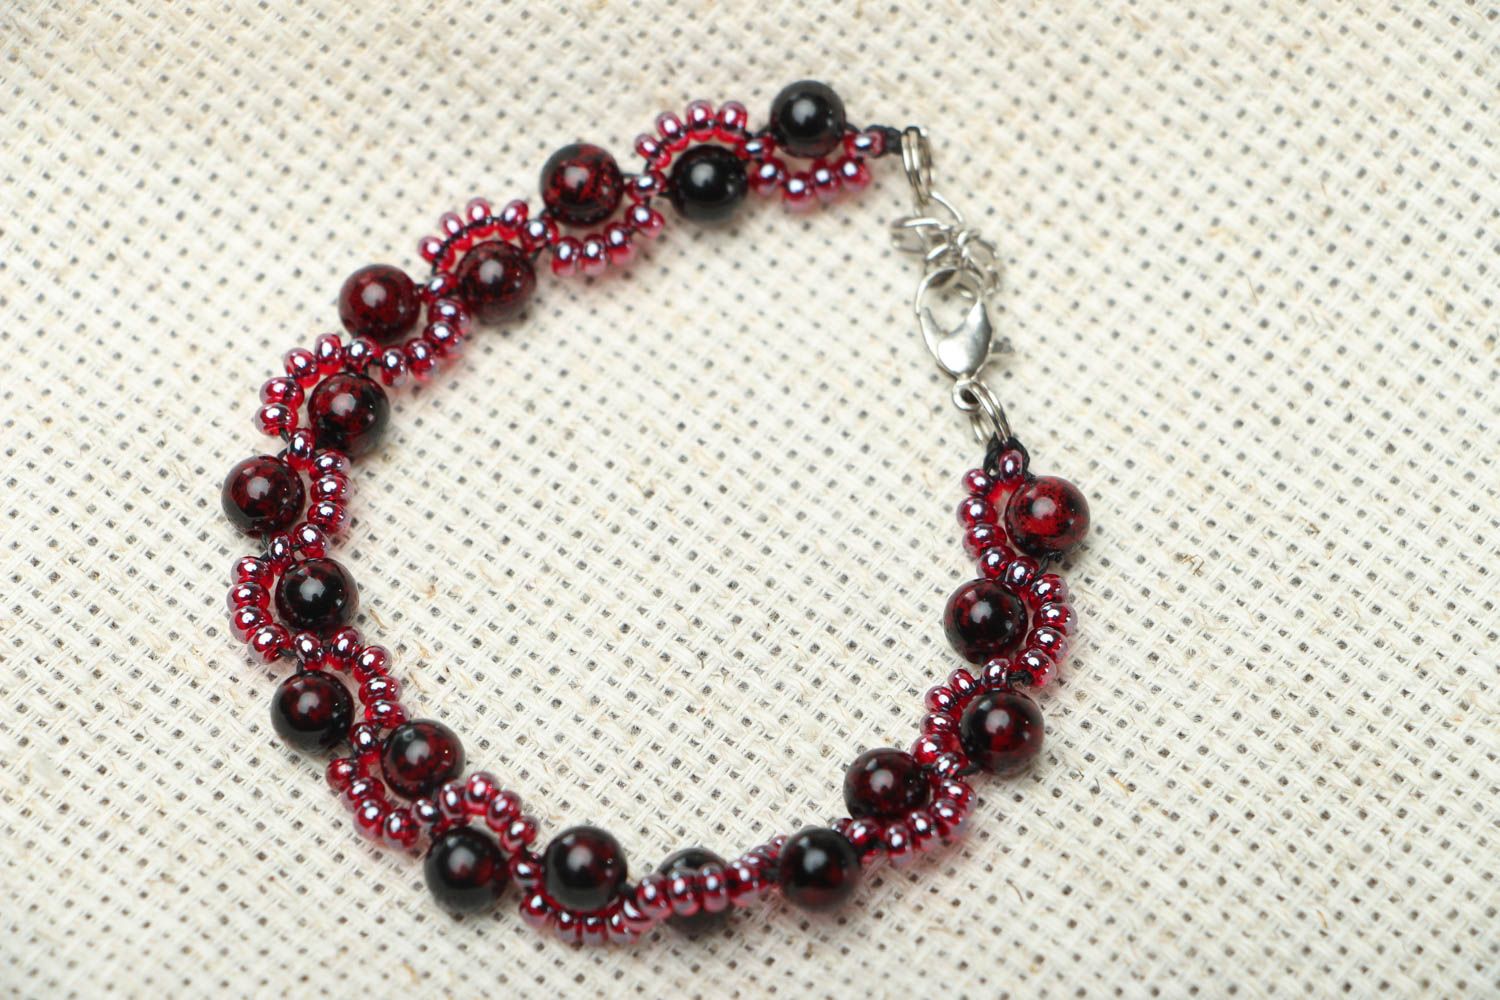 Homemade bracelet with beads and garnet photo 1